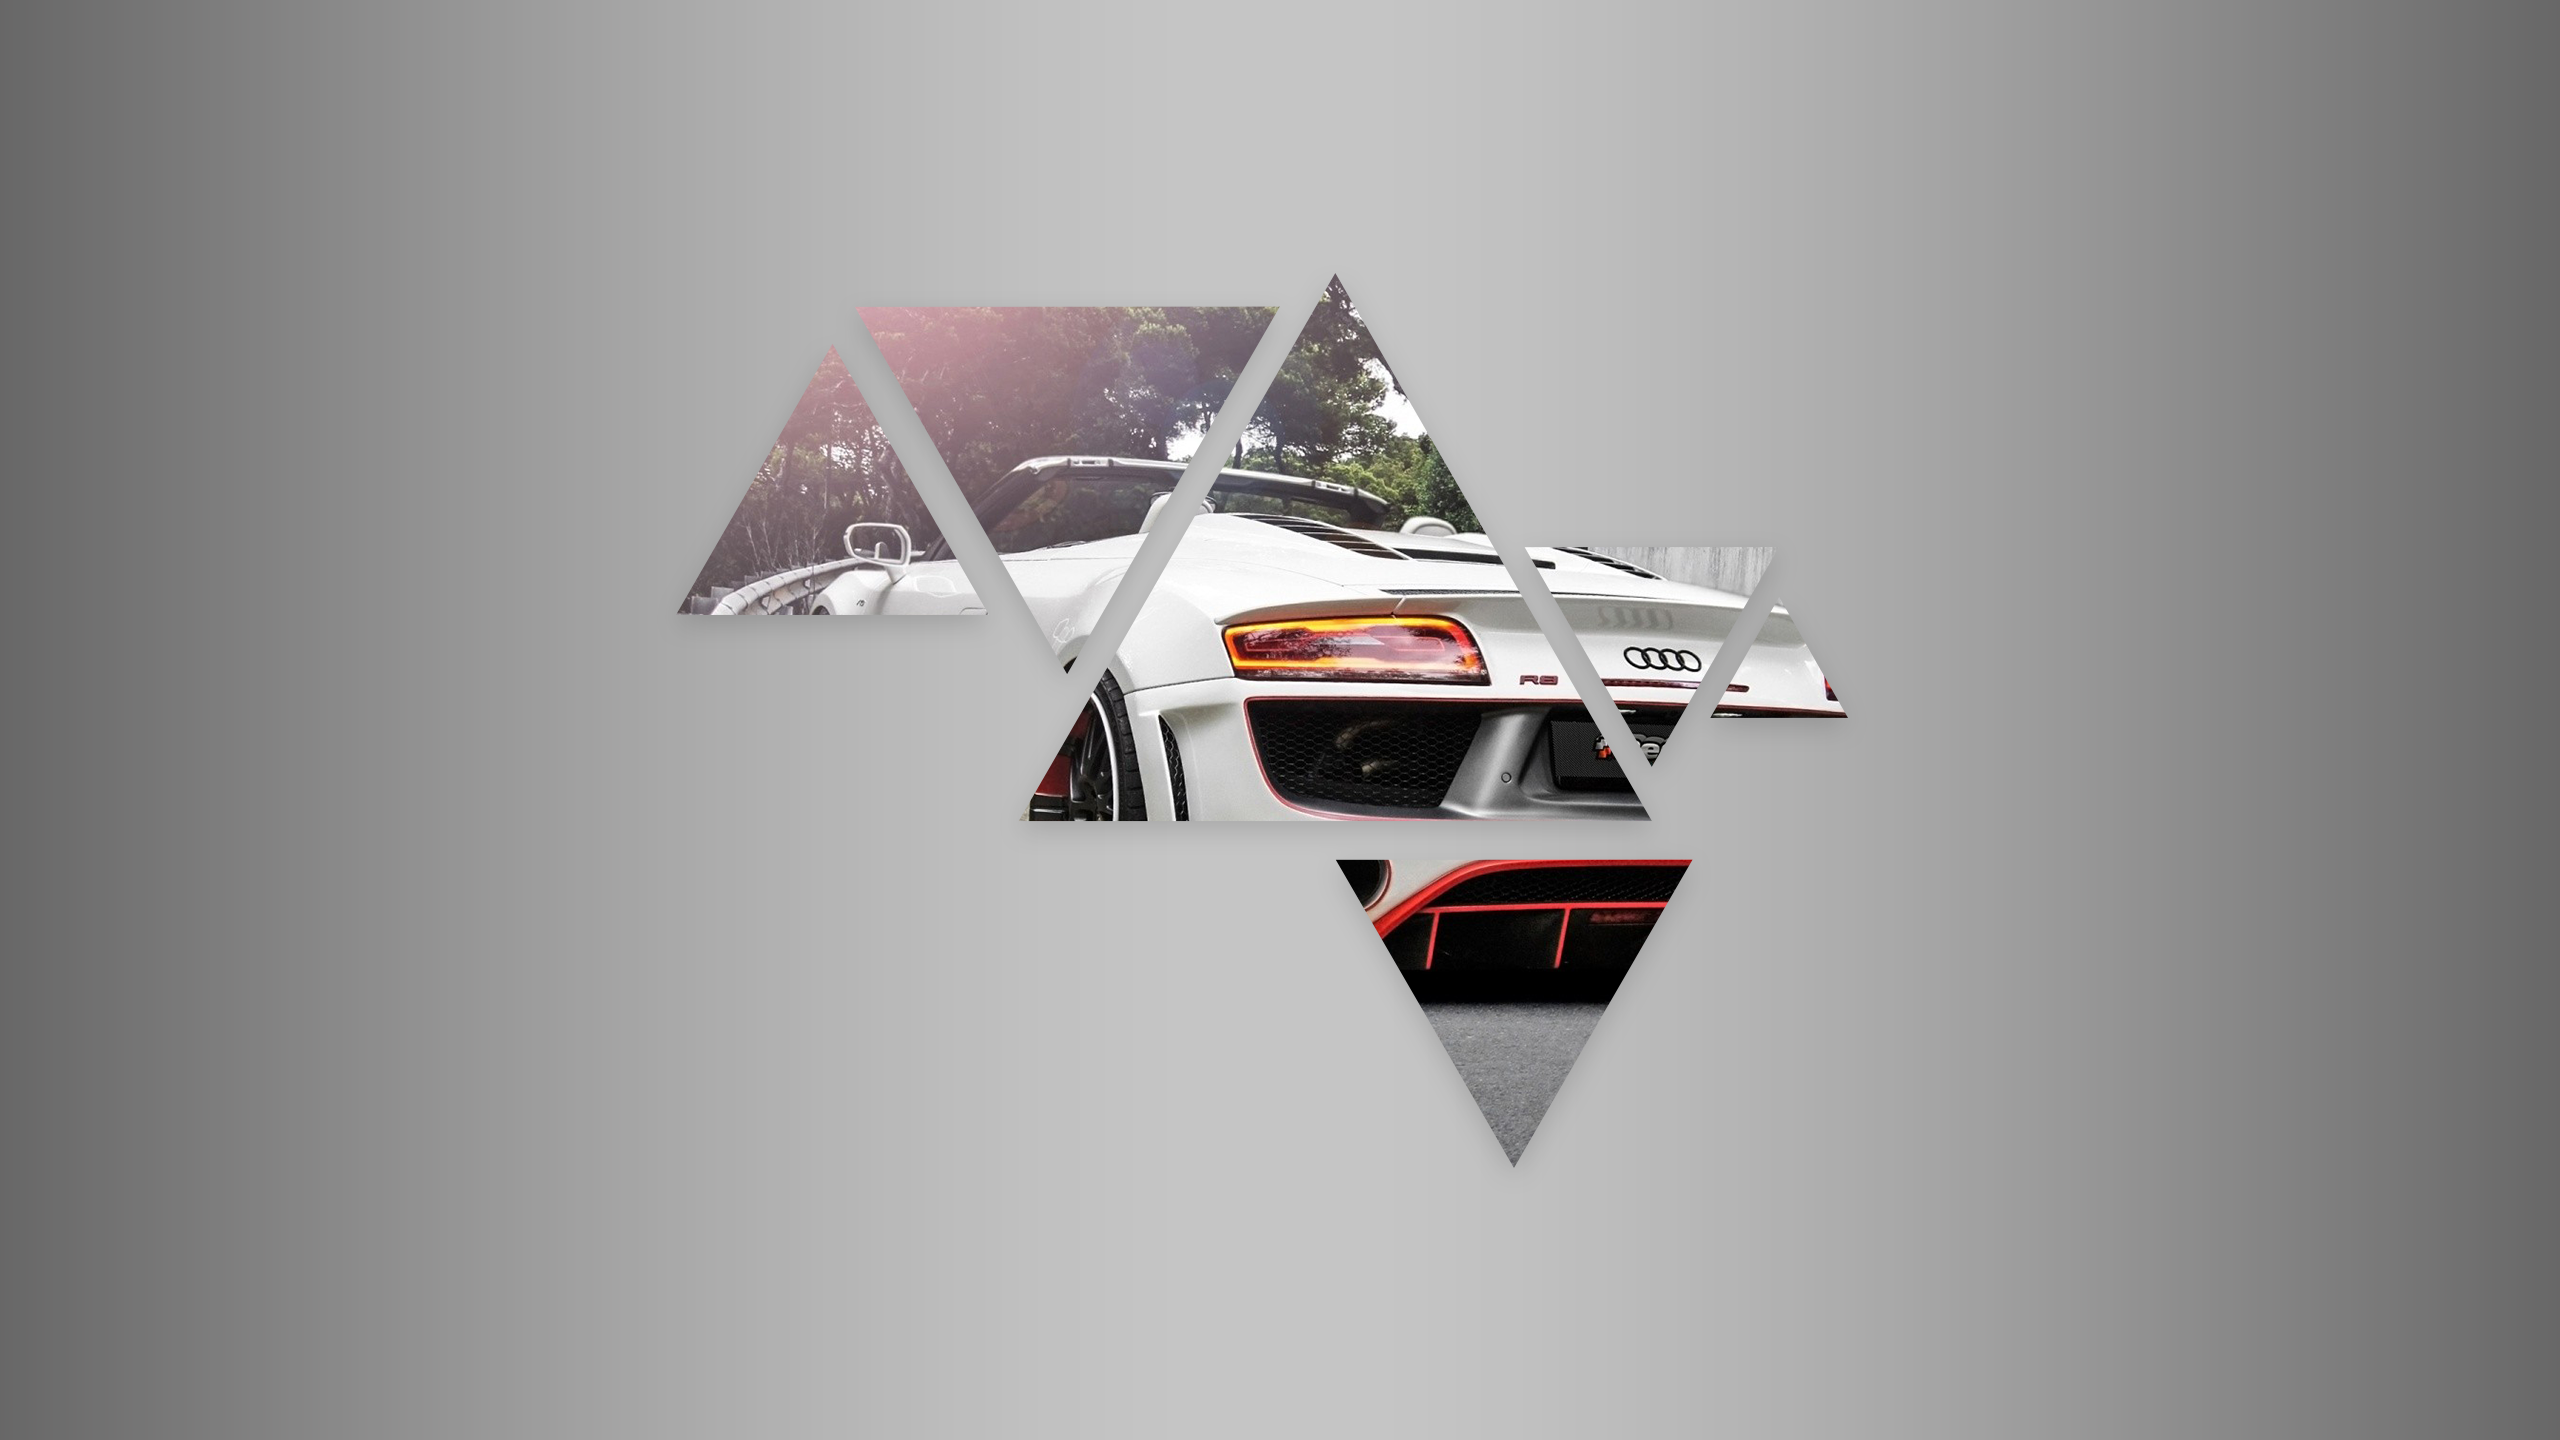 General 2560x1440 car abstract triangle